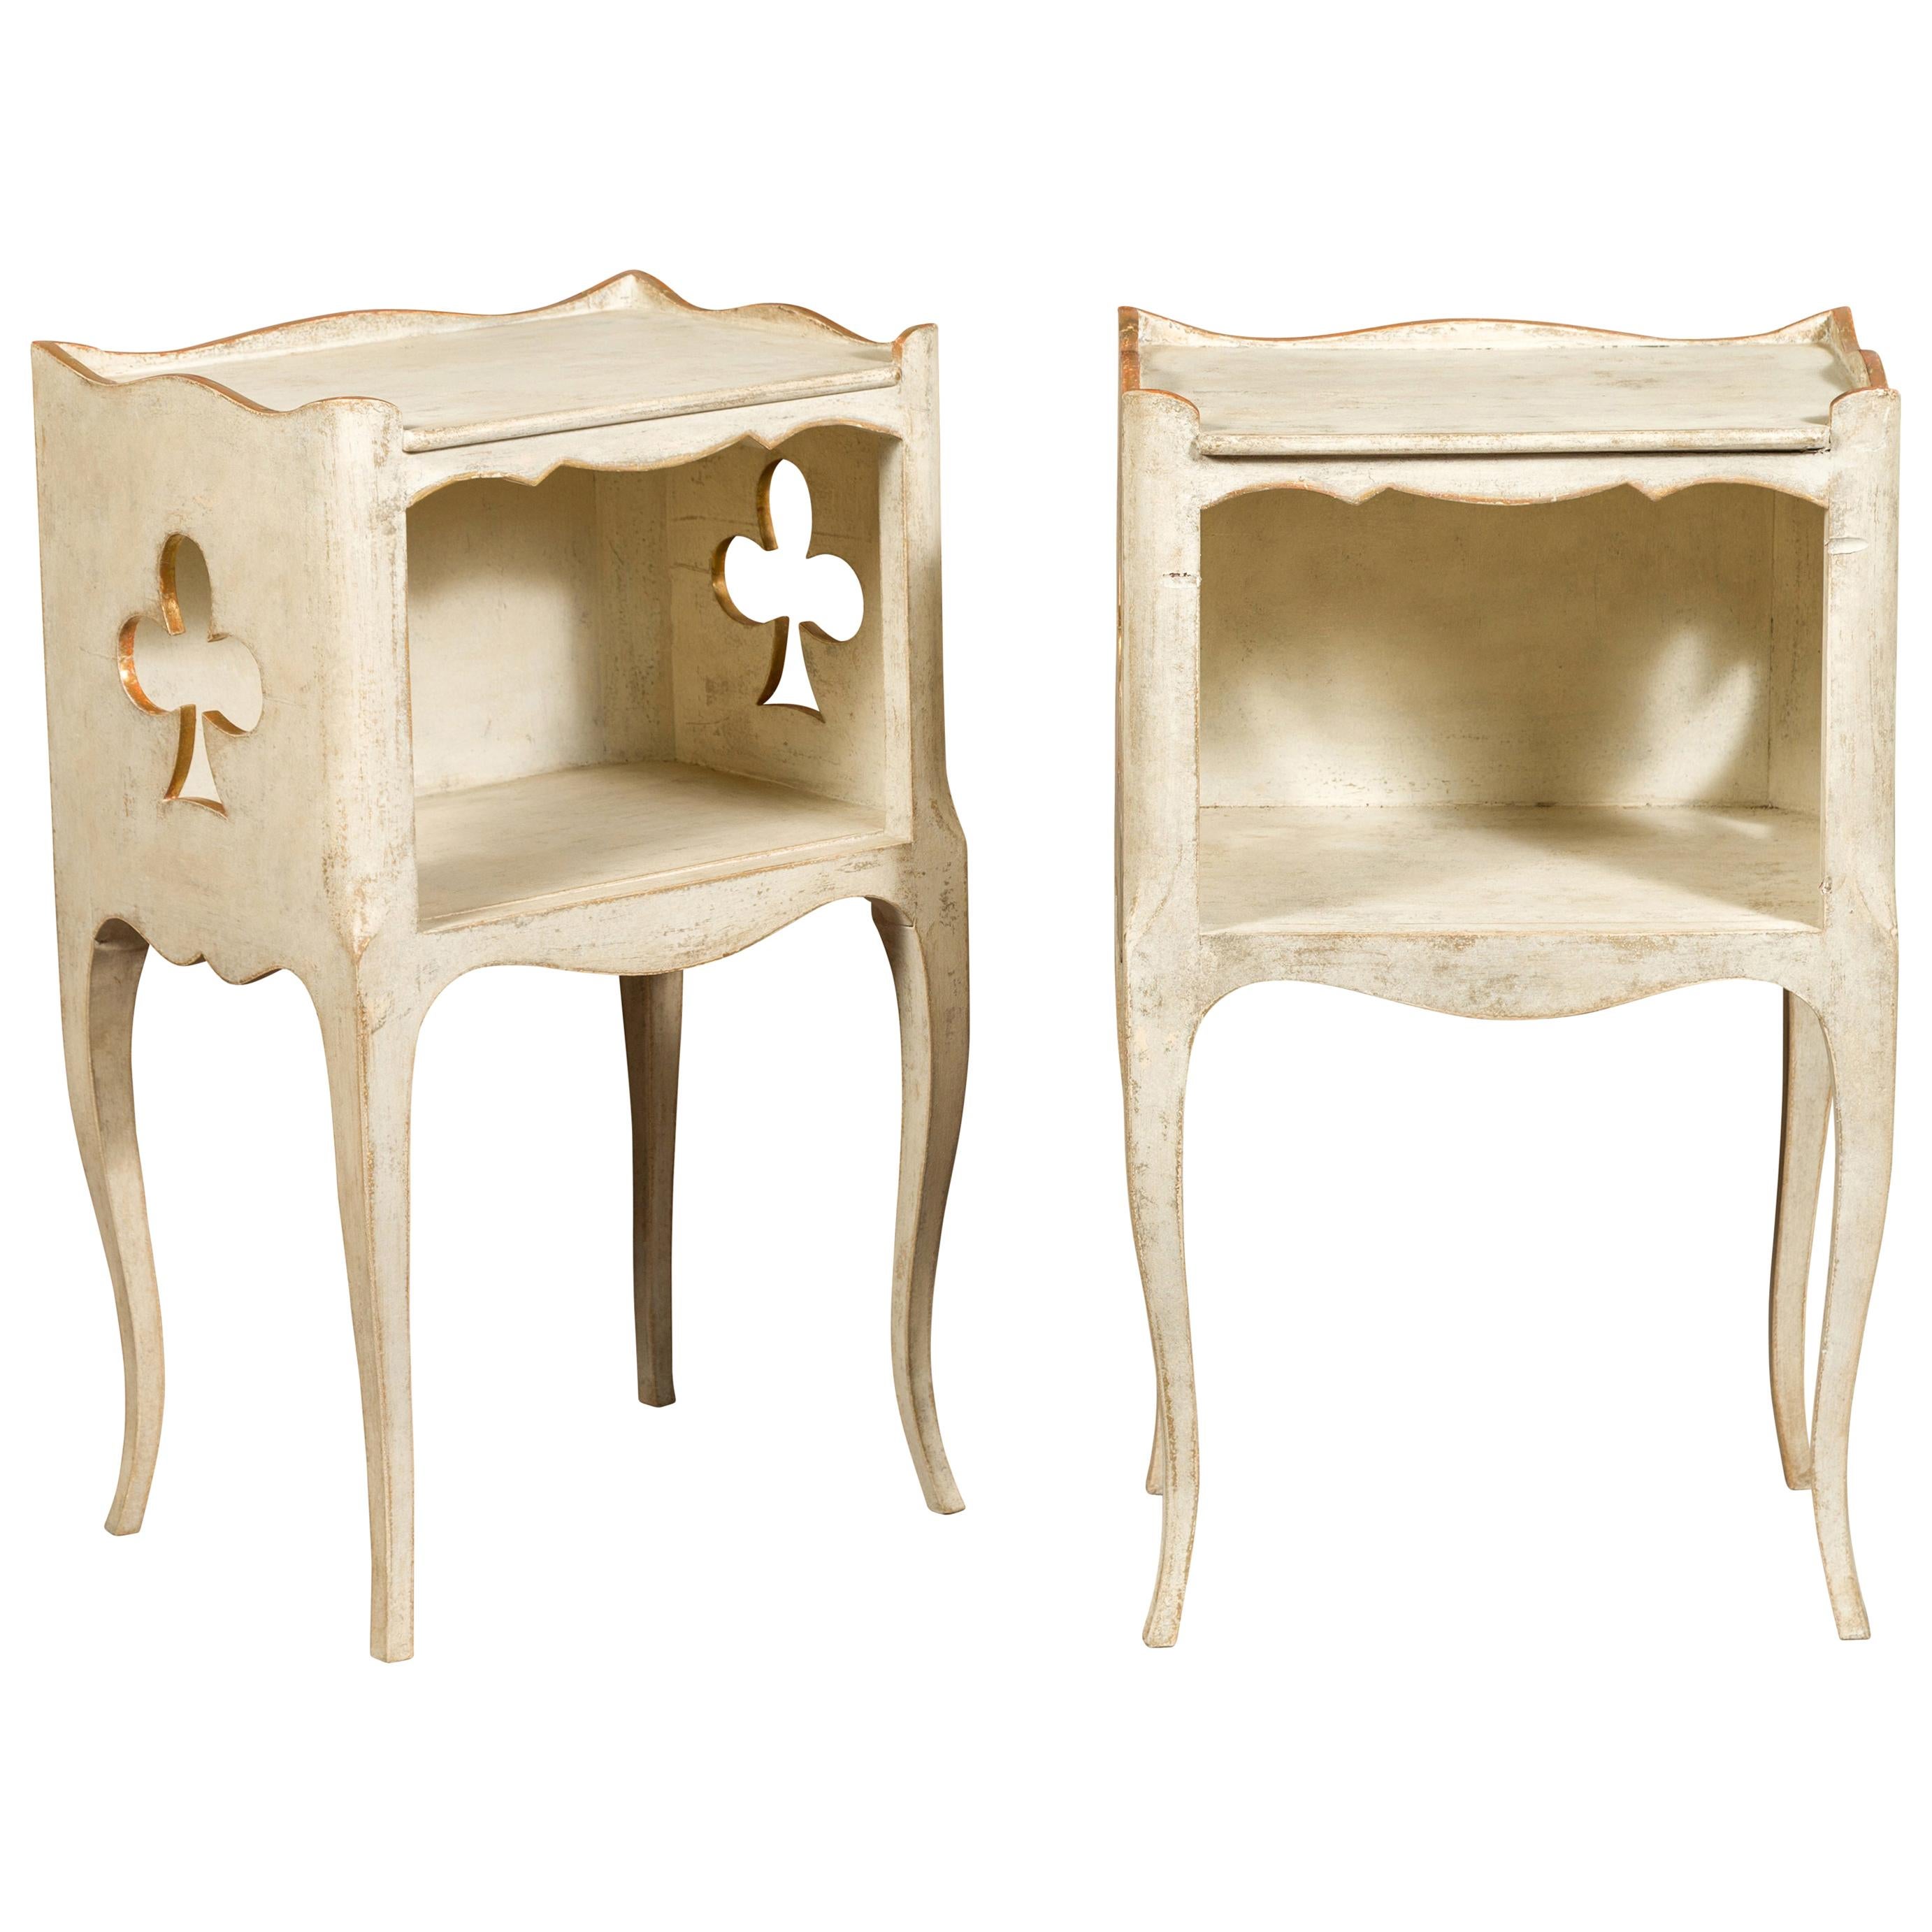 Pair of French 1920s Painted Bedside Tables with Gilt Highlights and Club Motifs